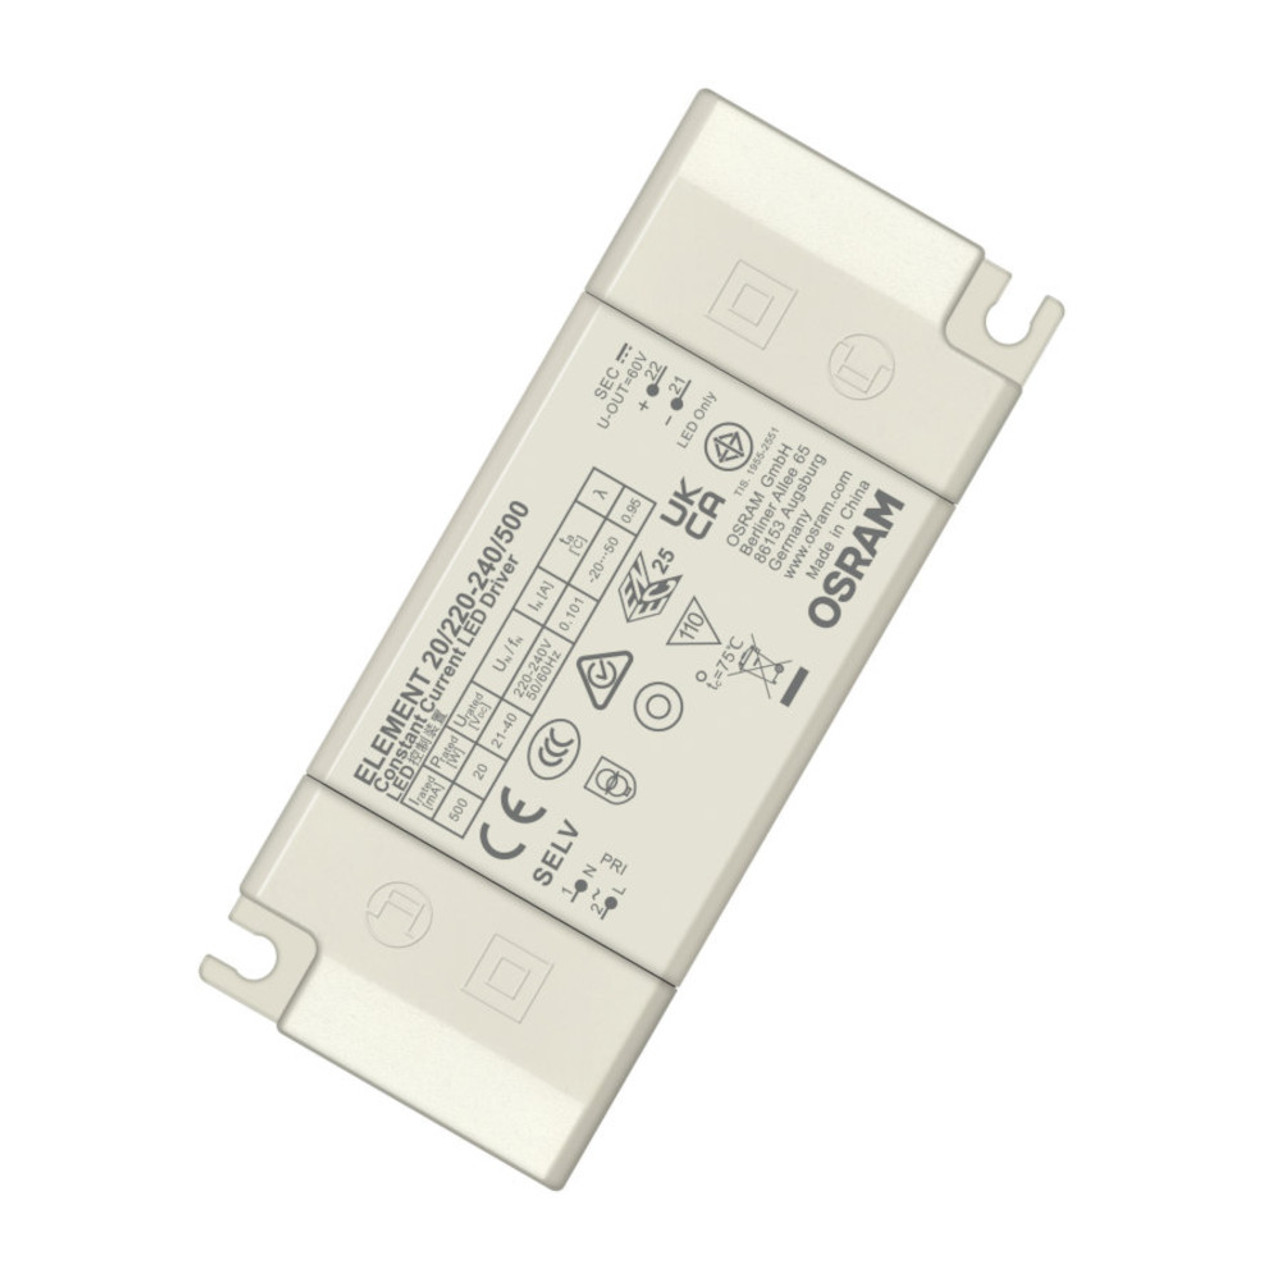 Osram Element G4 20W 500mA Constant Current LED Driver